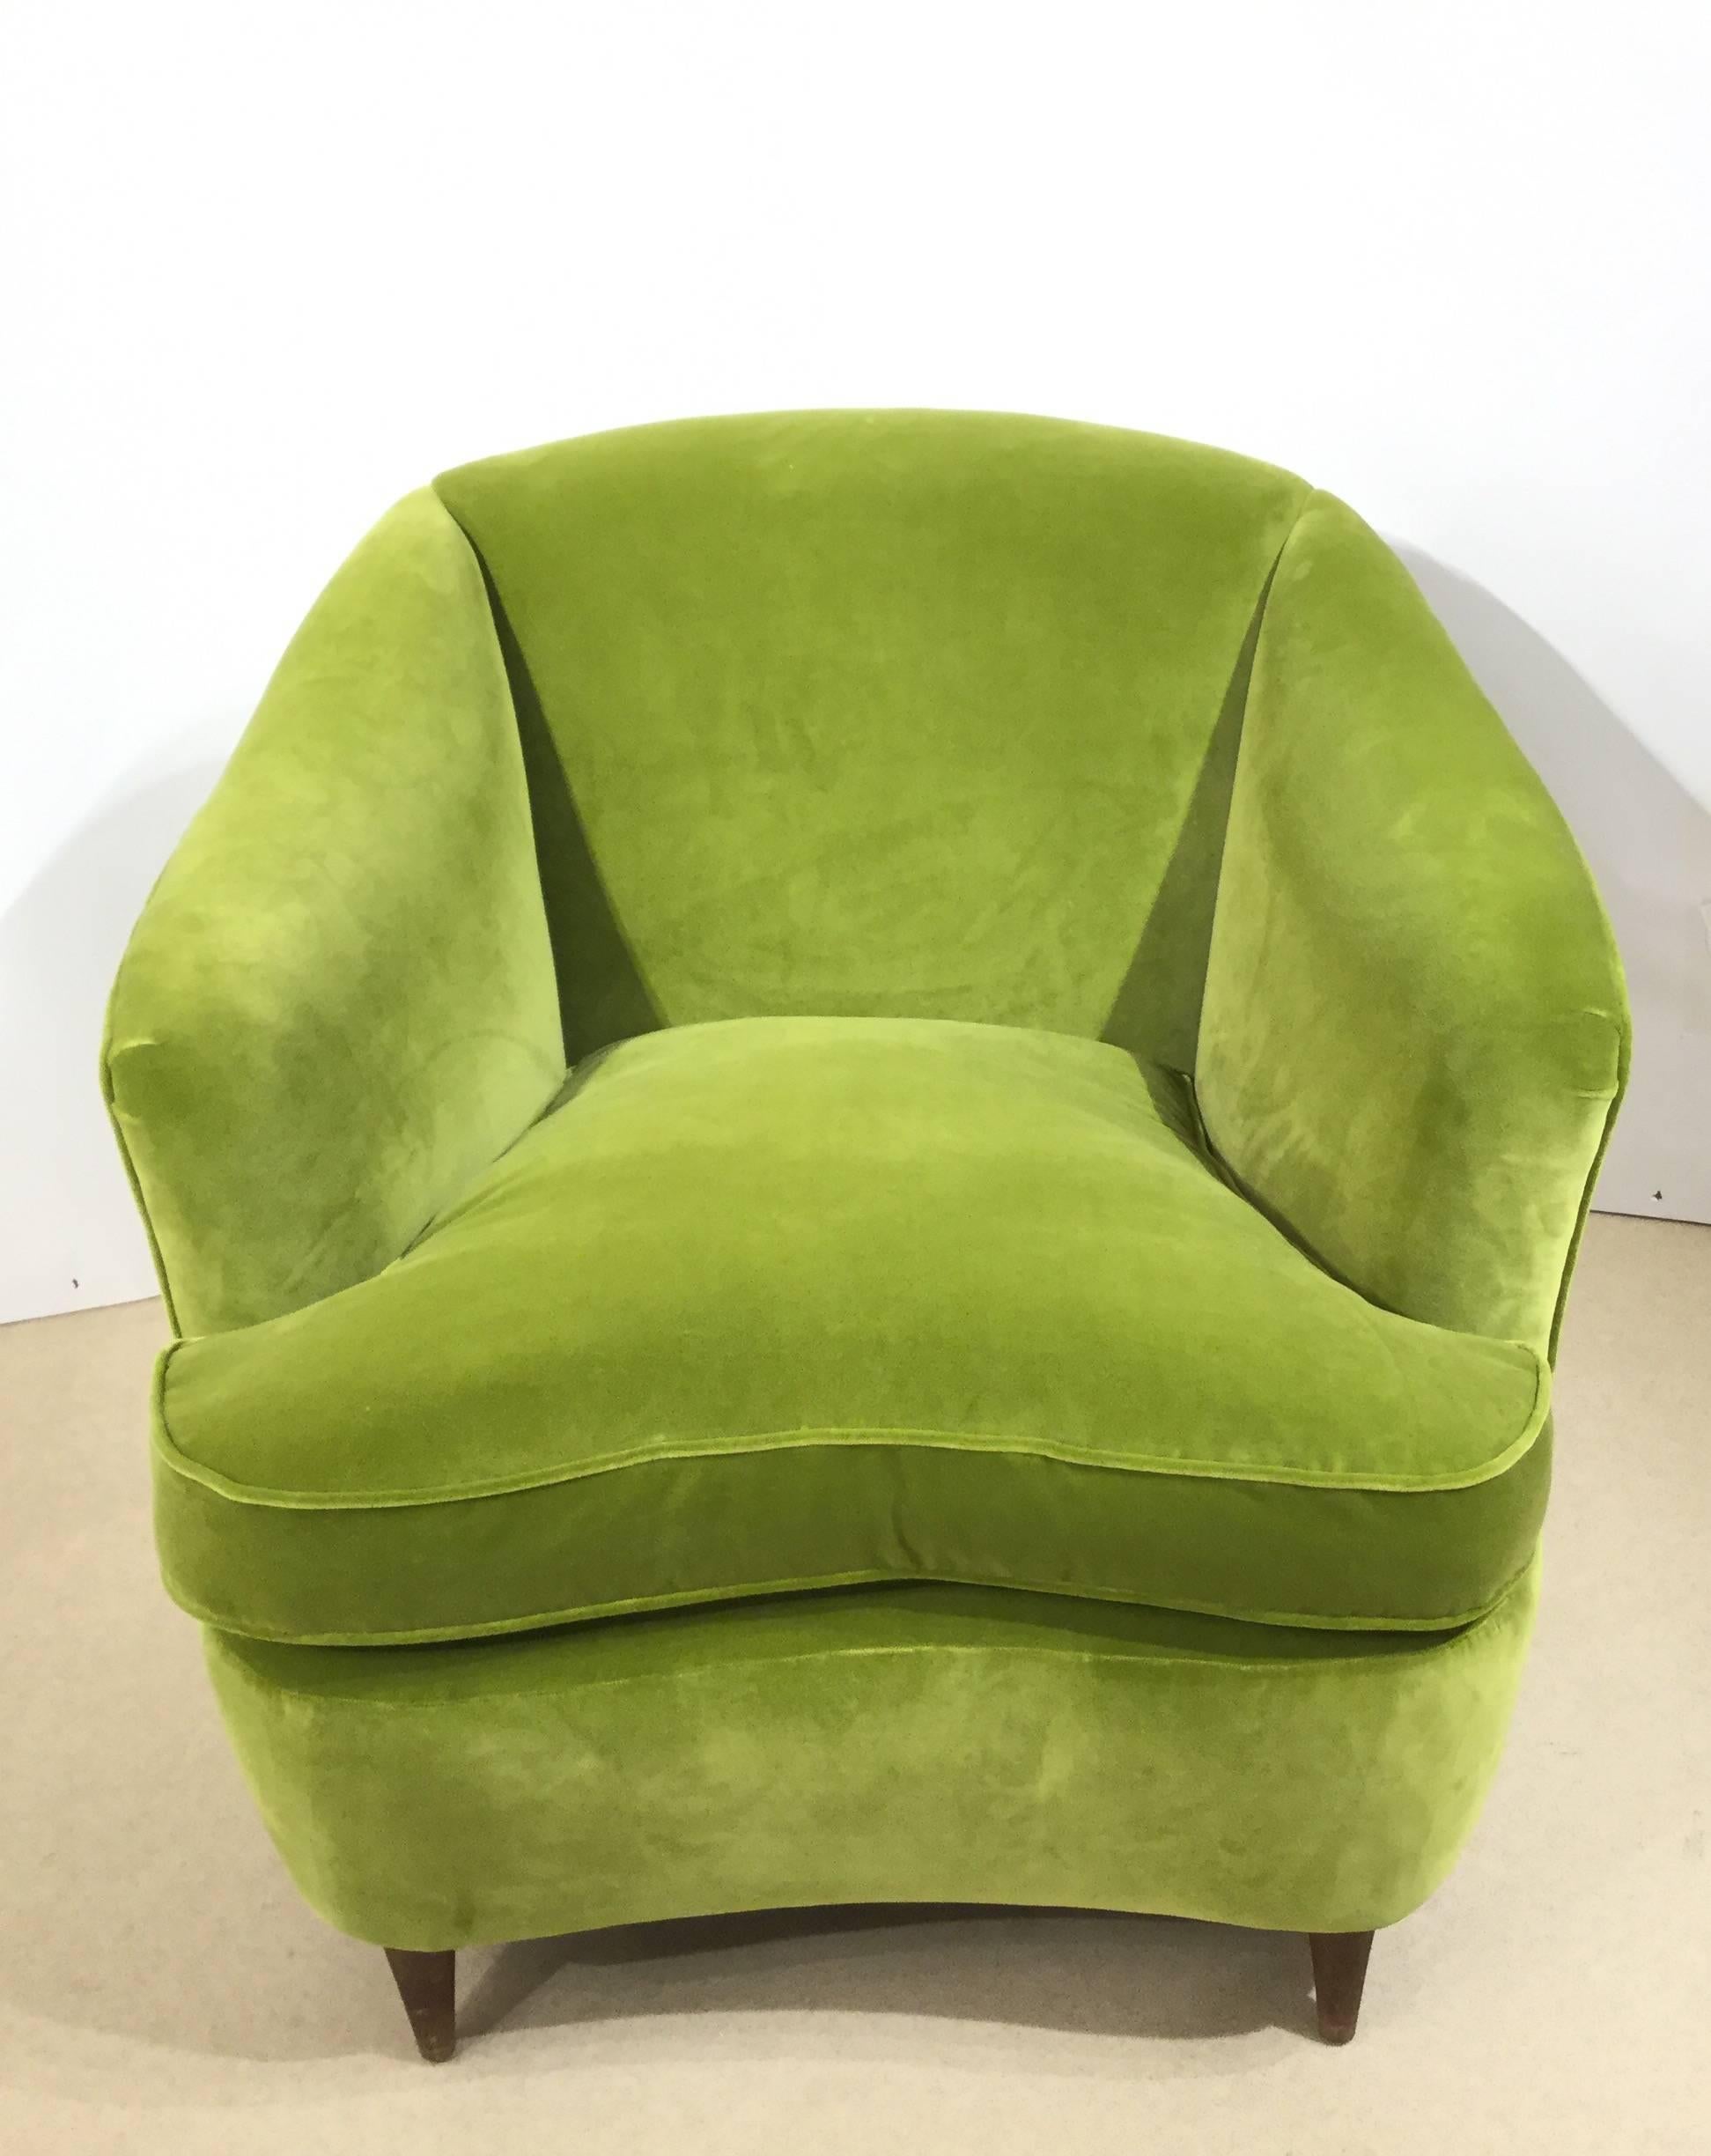 An Italian designed Art Deco armchair reupholstered in velvet with feather cushion, circa 1930.